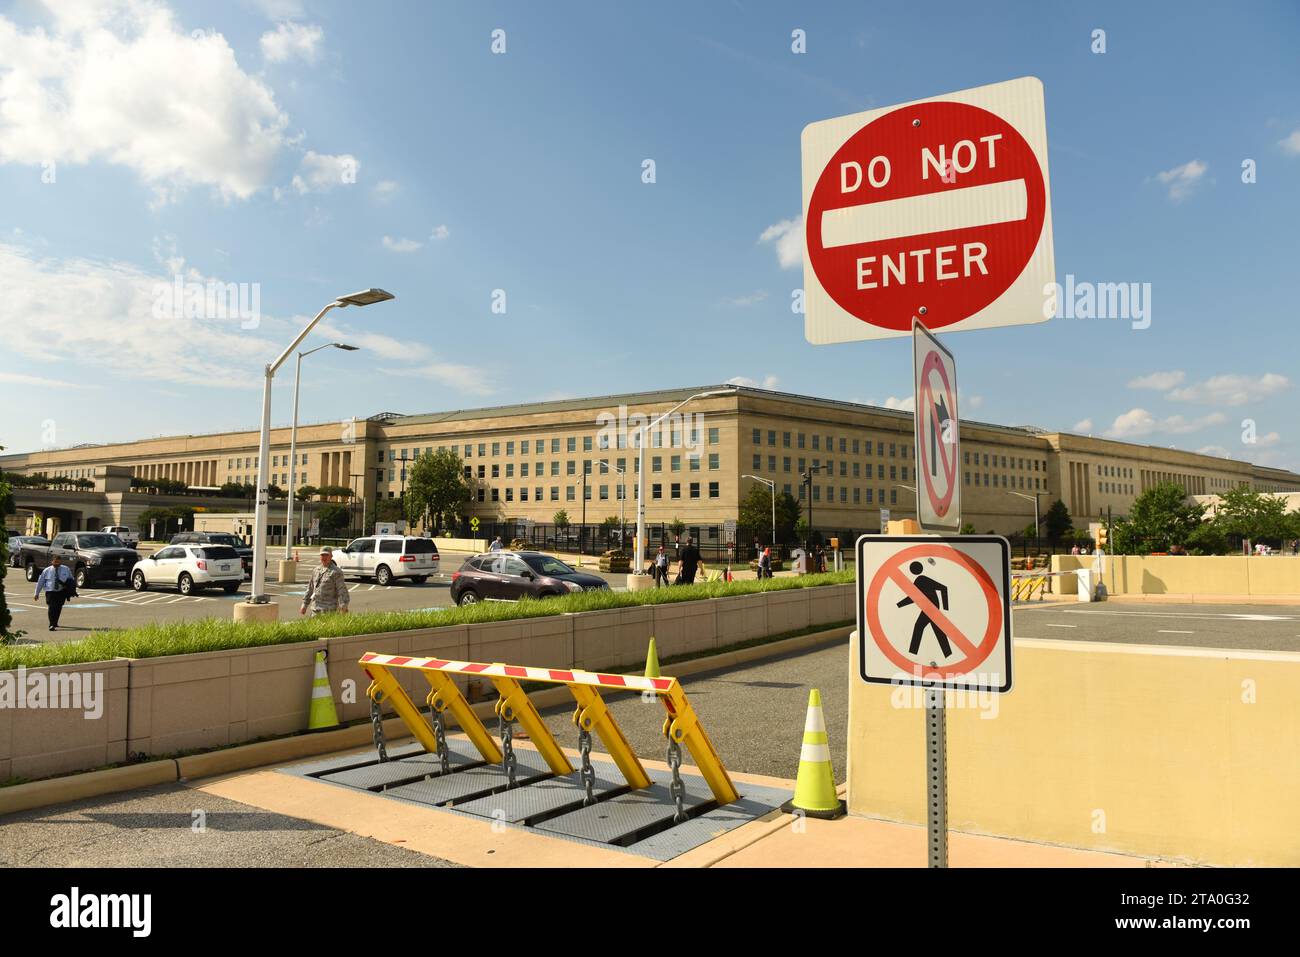 Washington, DC - June 01, 2018: Safety barriers and stop sign in front of Pentagon building, headquarters for the United States Department of Defense. Stock Photo